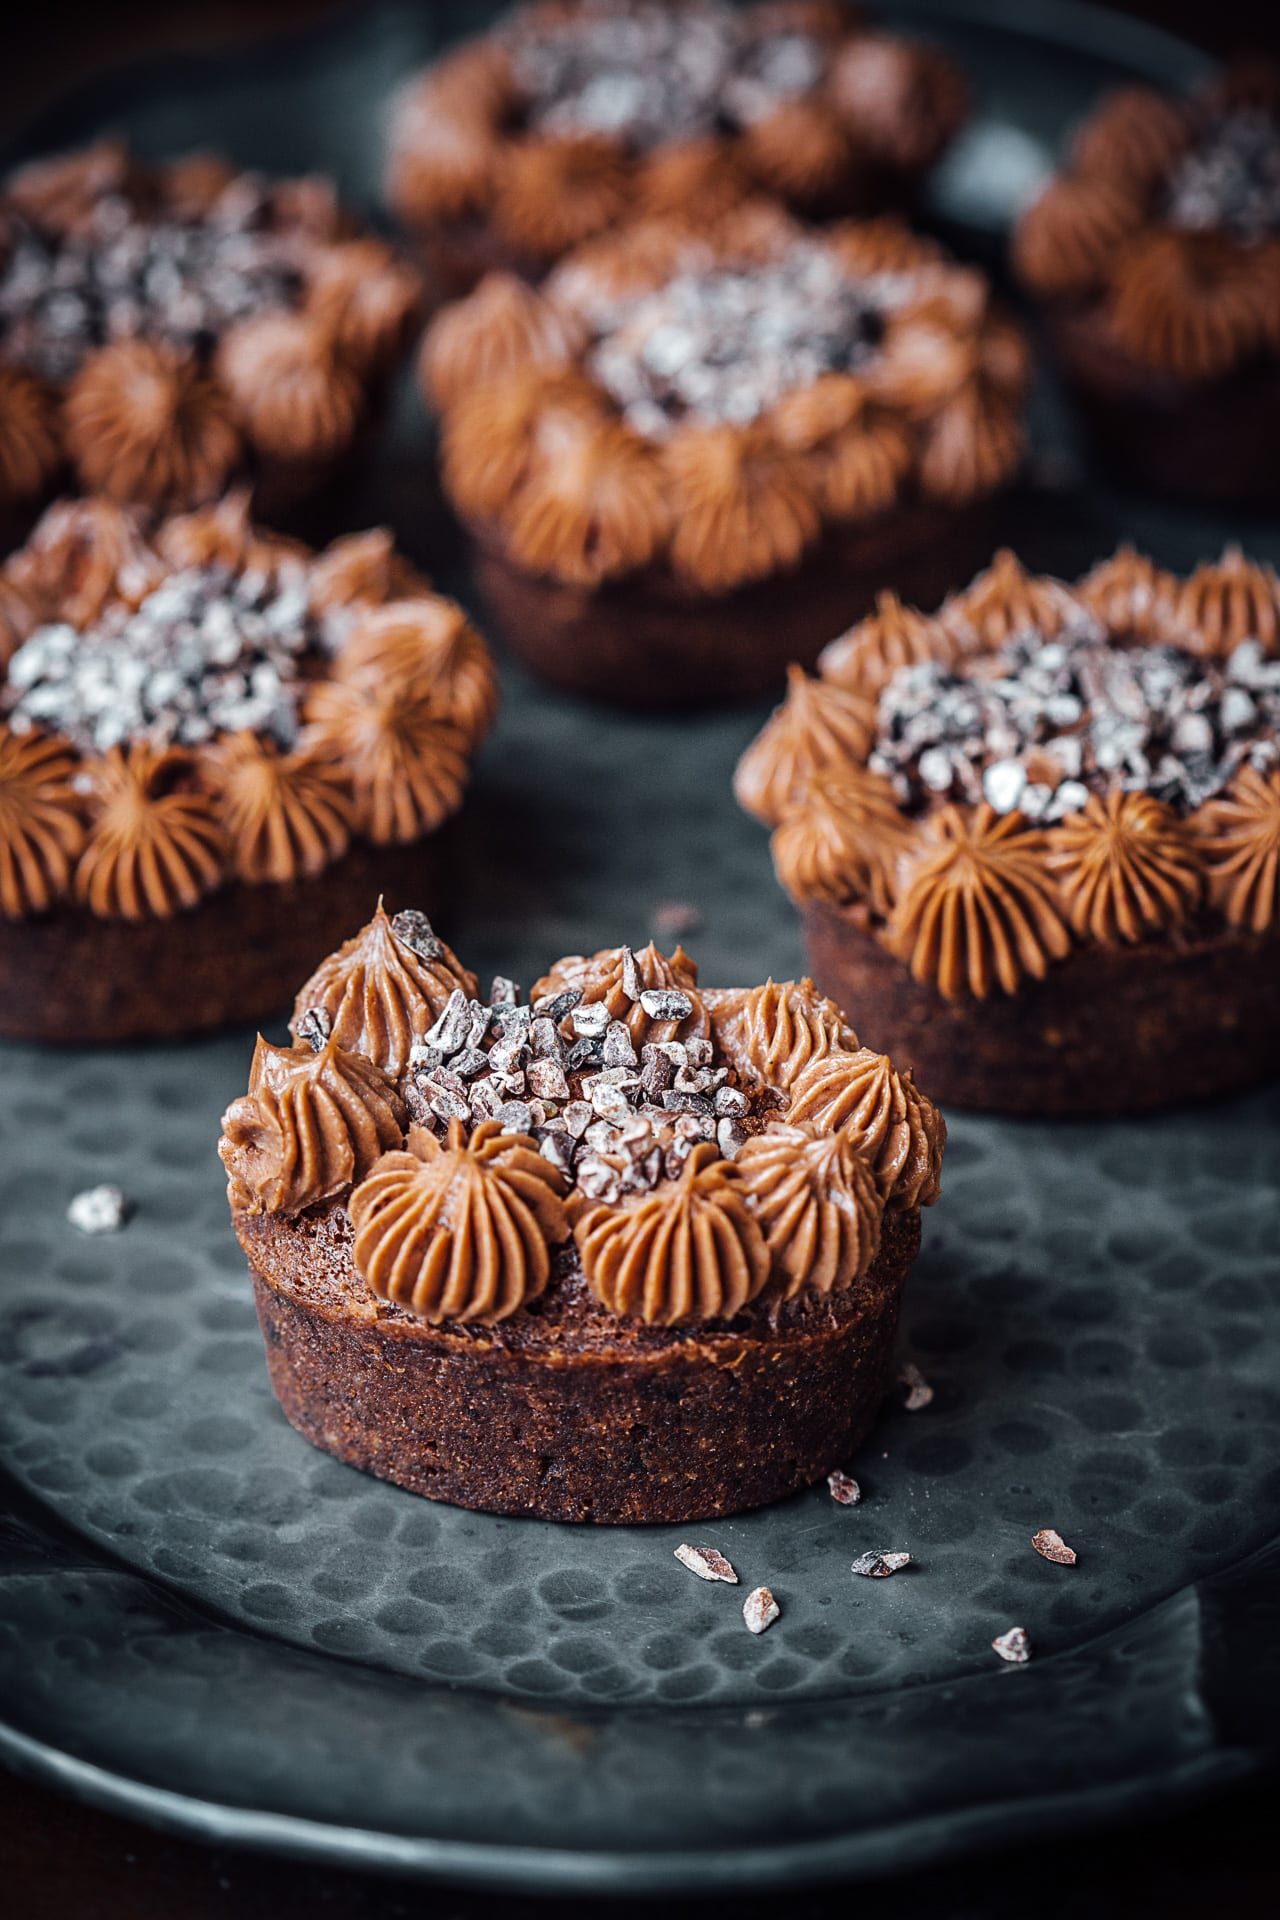 Chocolate Hazelnut Friands with Chocolate Cream Cheese Frosting (by Sonali Ghosh) | Playful Cooking